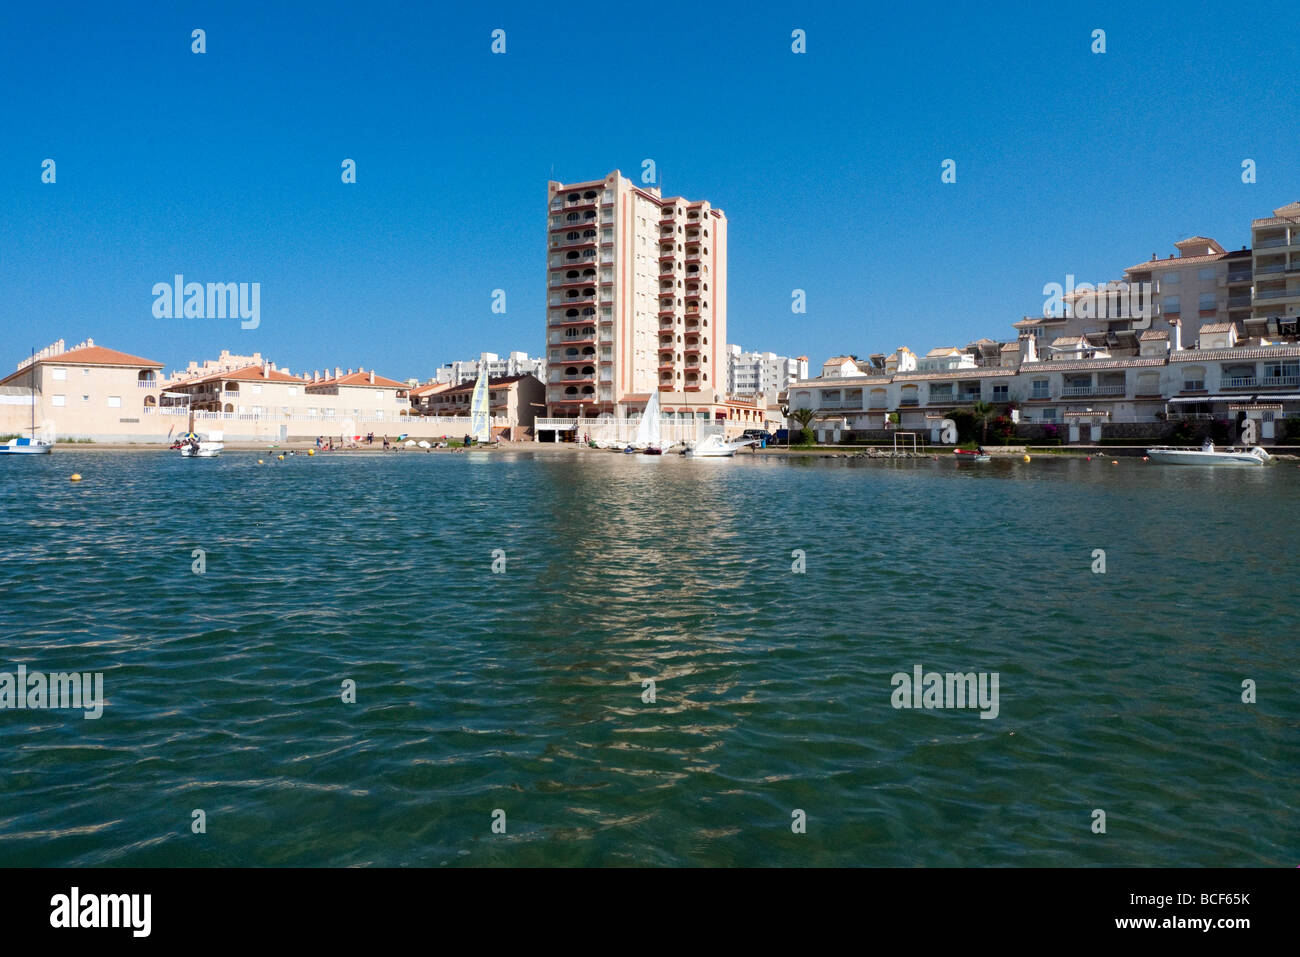 Apartments and beach by the Mar Menor (Inland Sea) in the region of Murcia, Spain Stock Photo